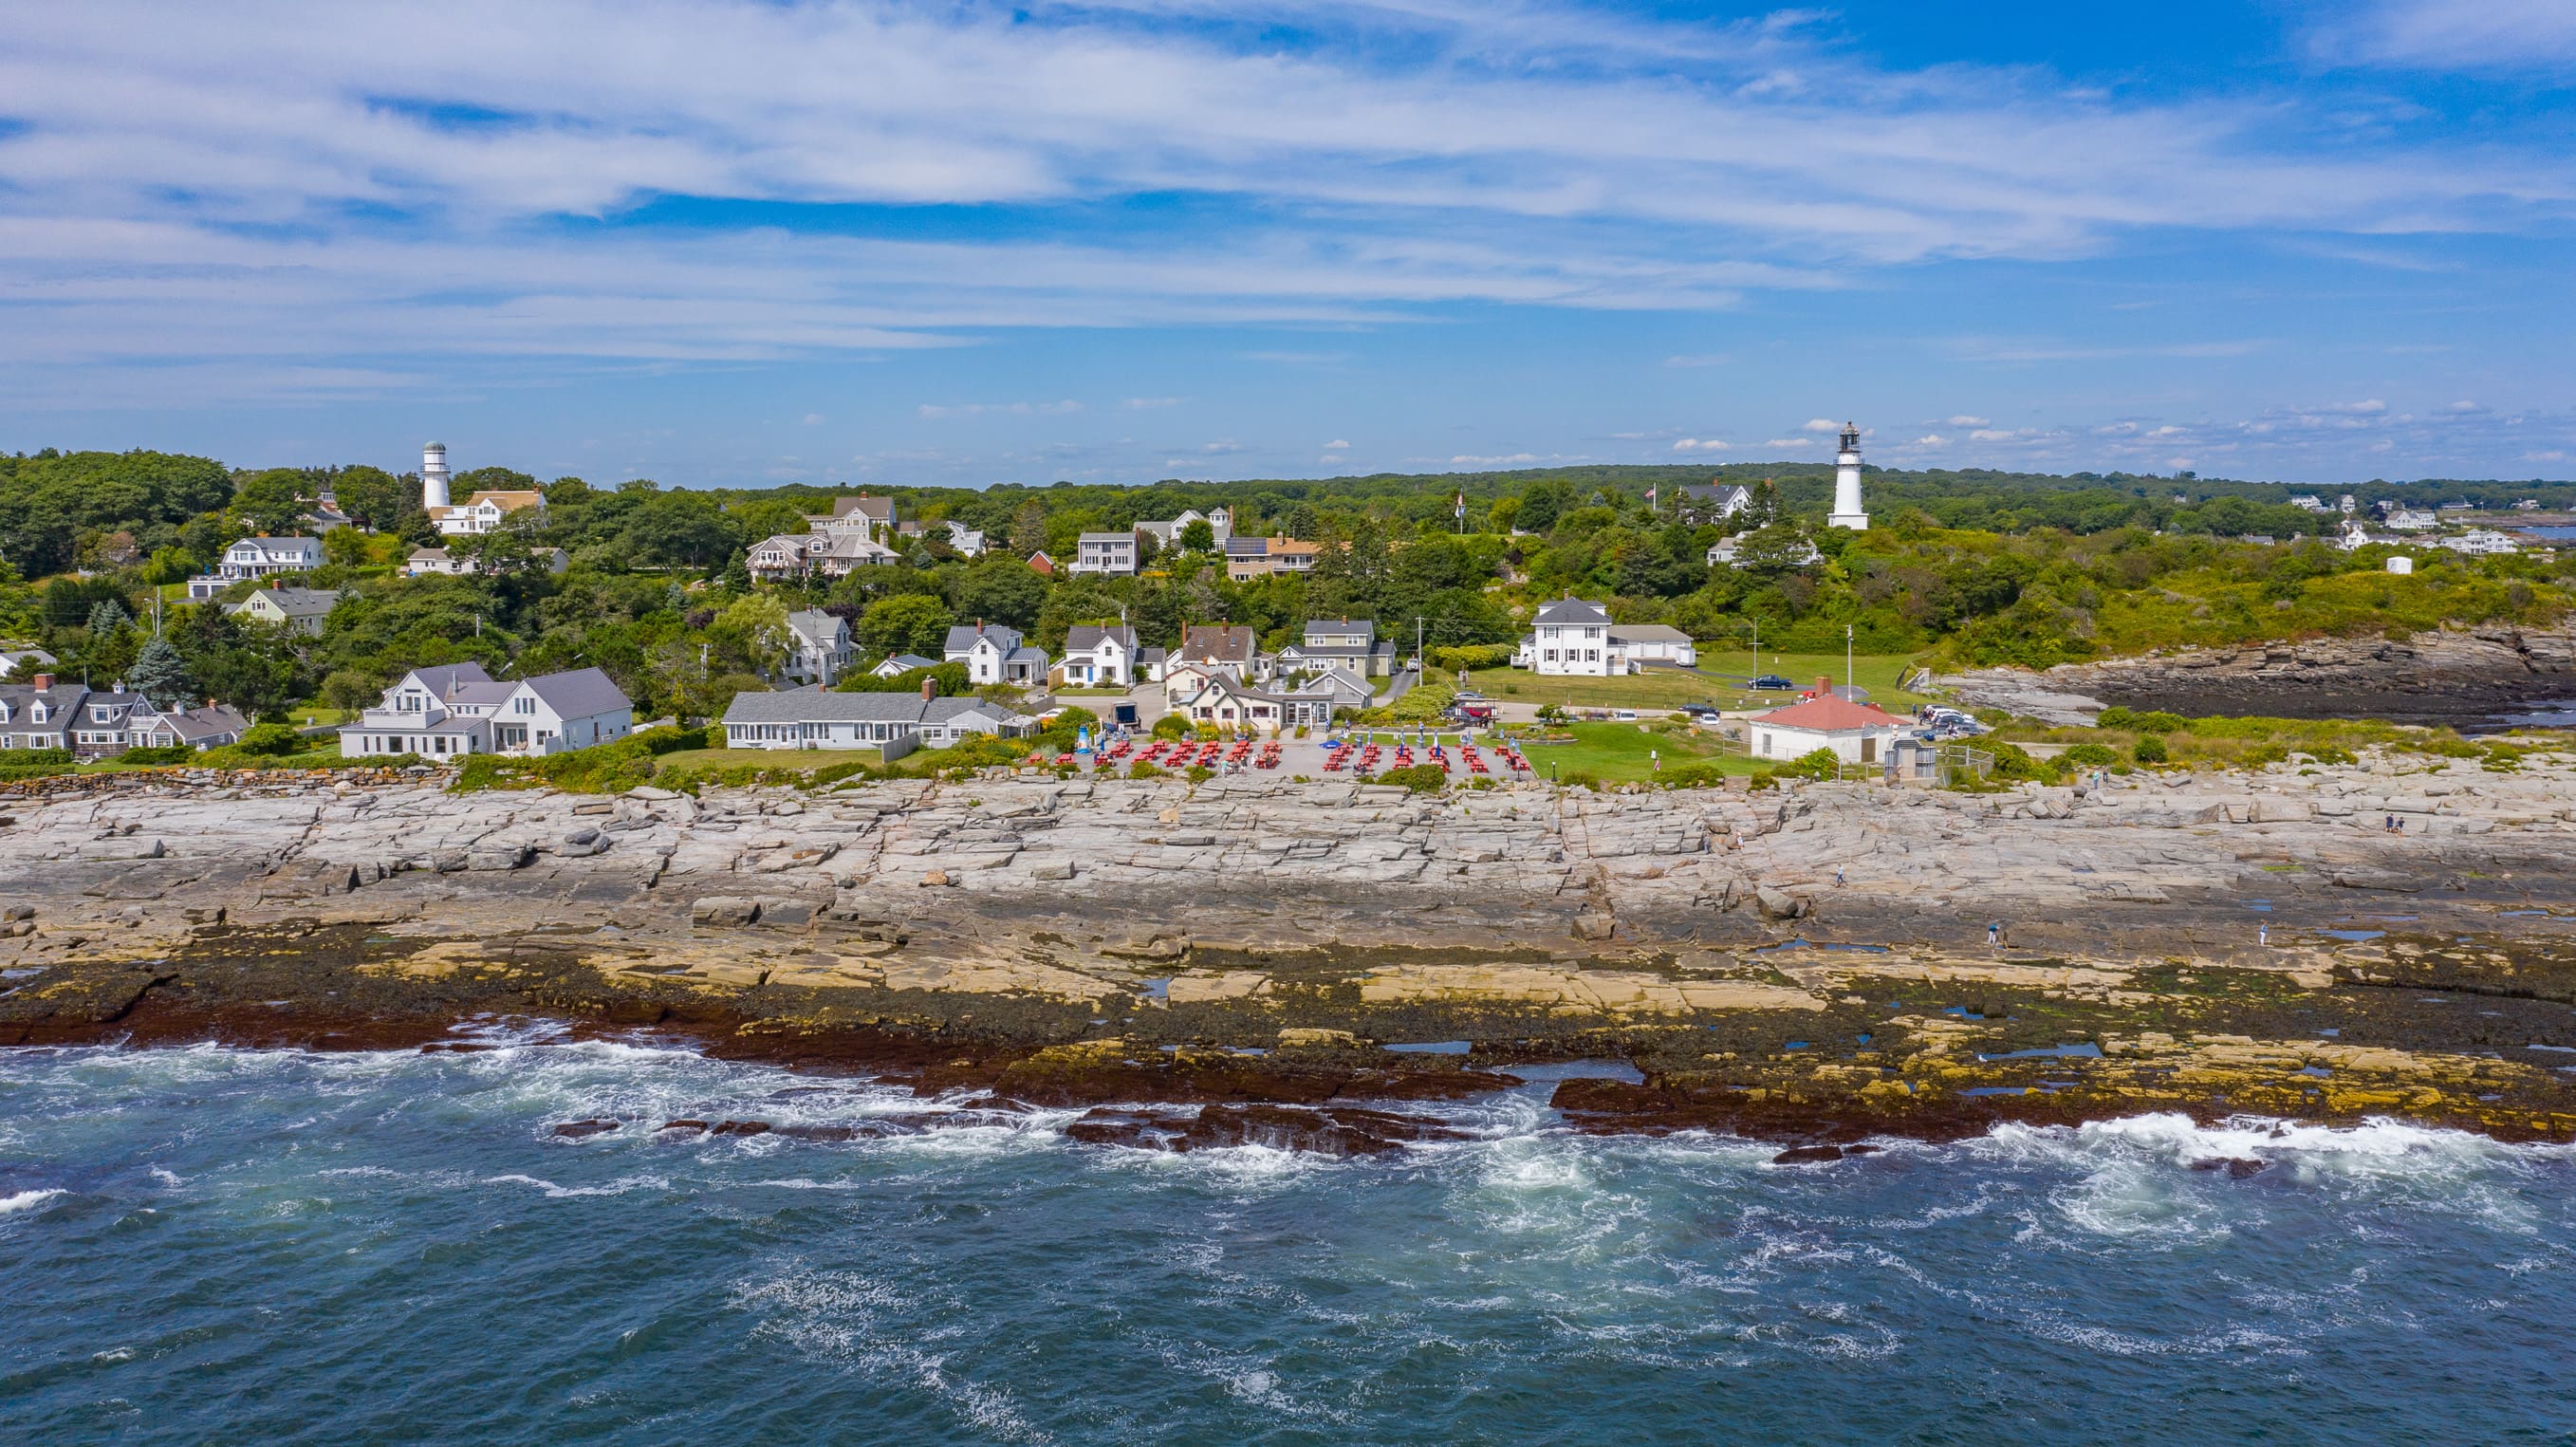 arial photo of famous Portland Maine lighthouse